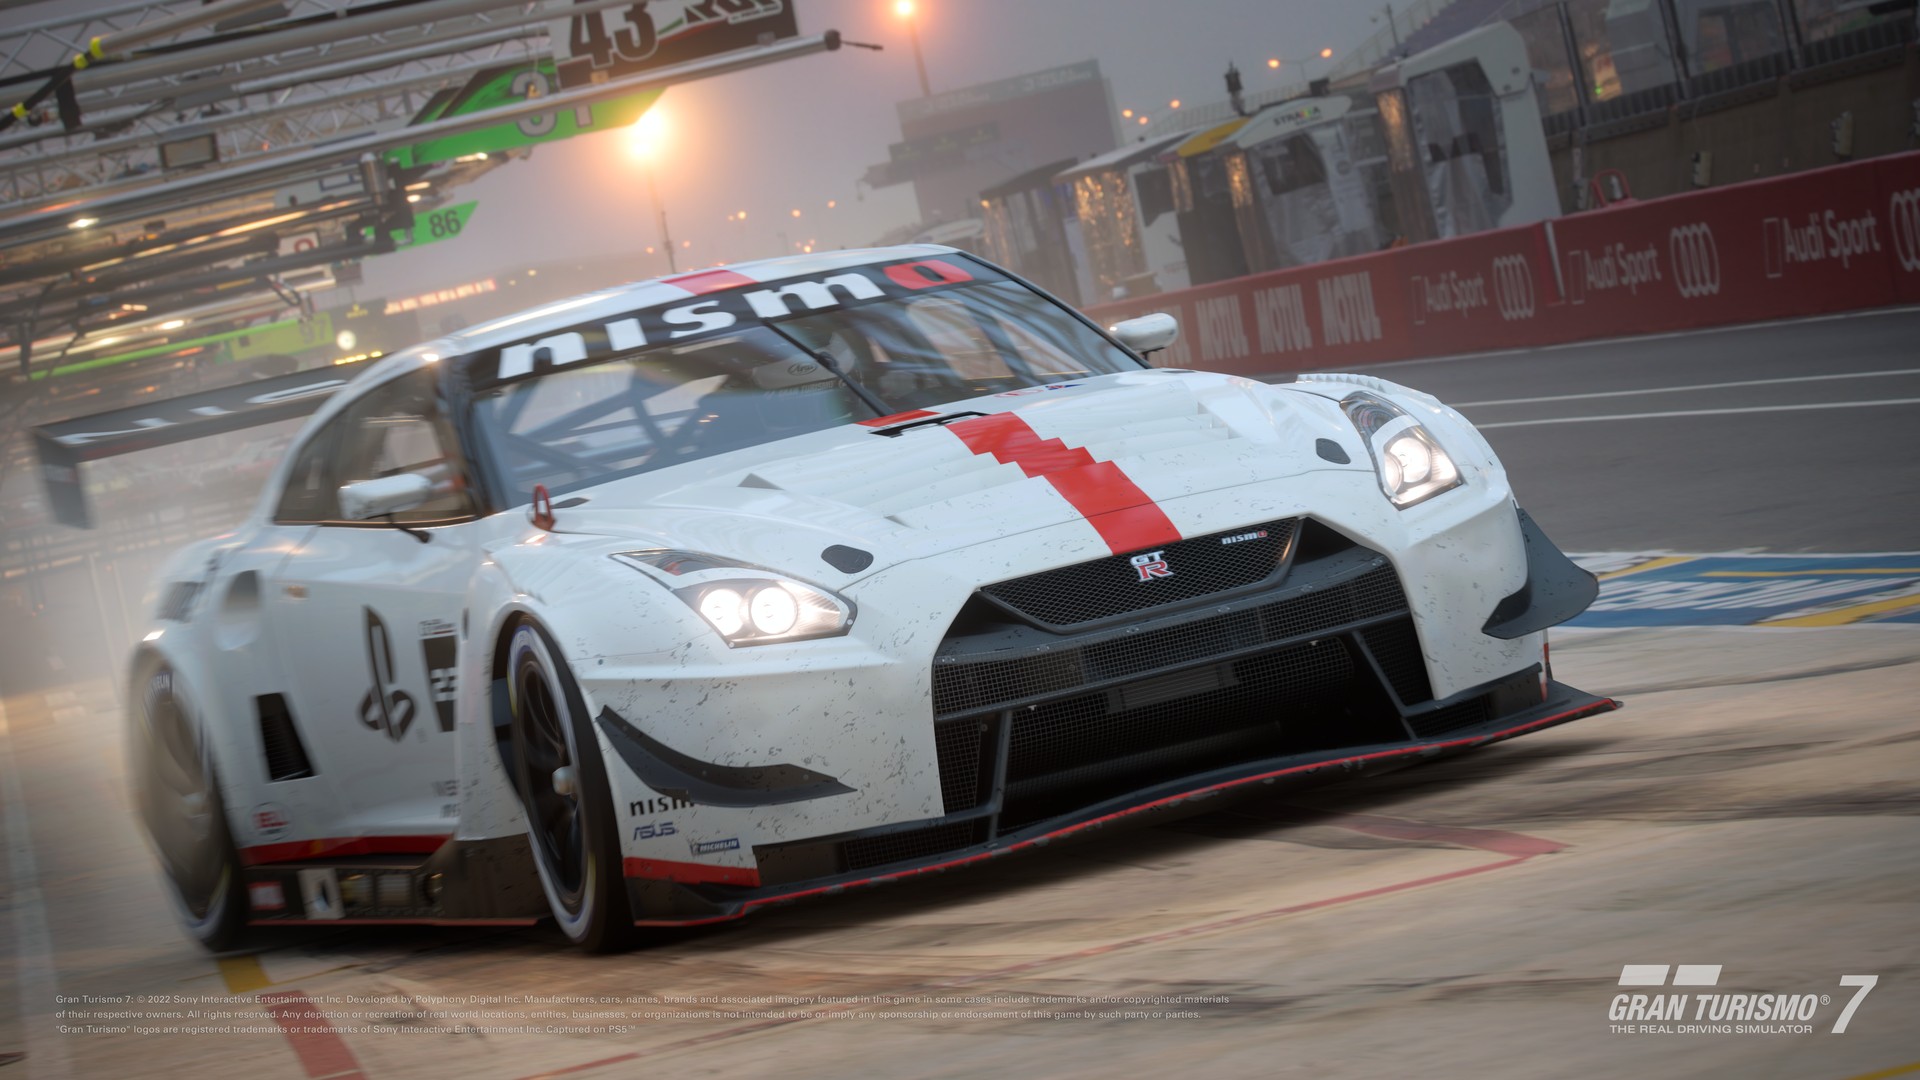 Gran Turismo 7 - Free May Update Released - Three New Cars - Bsimracing